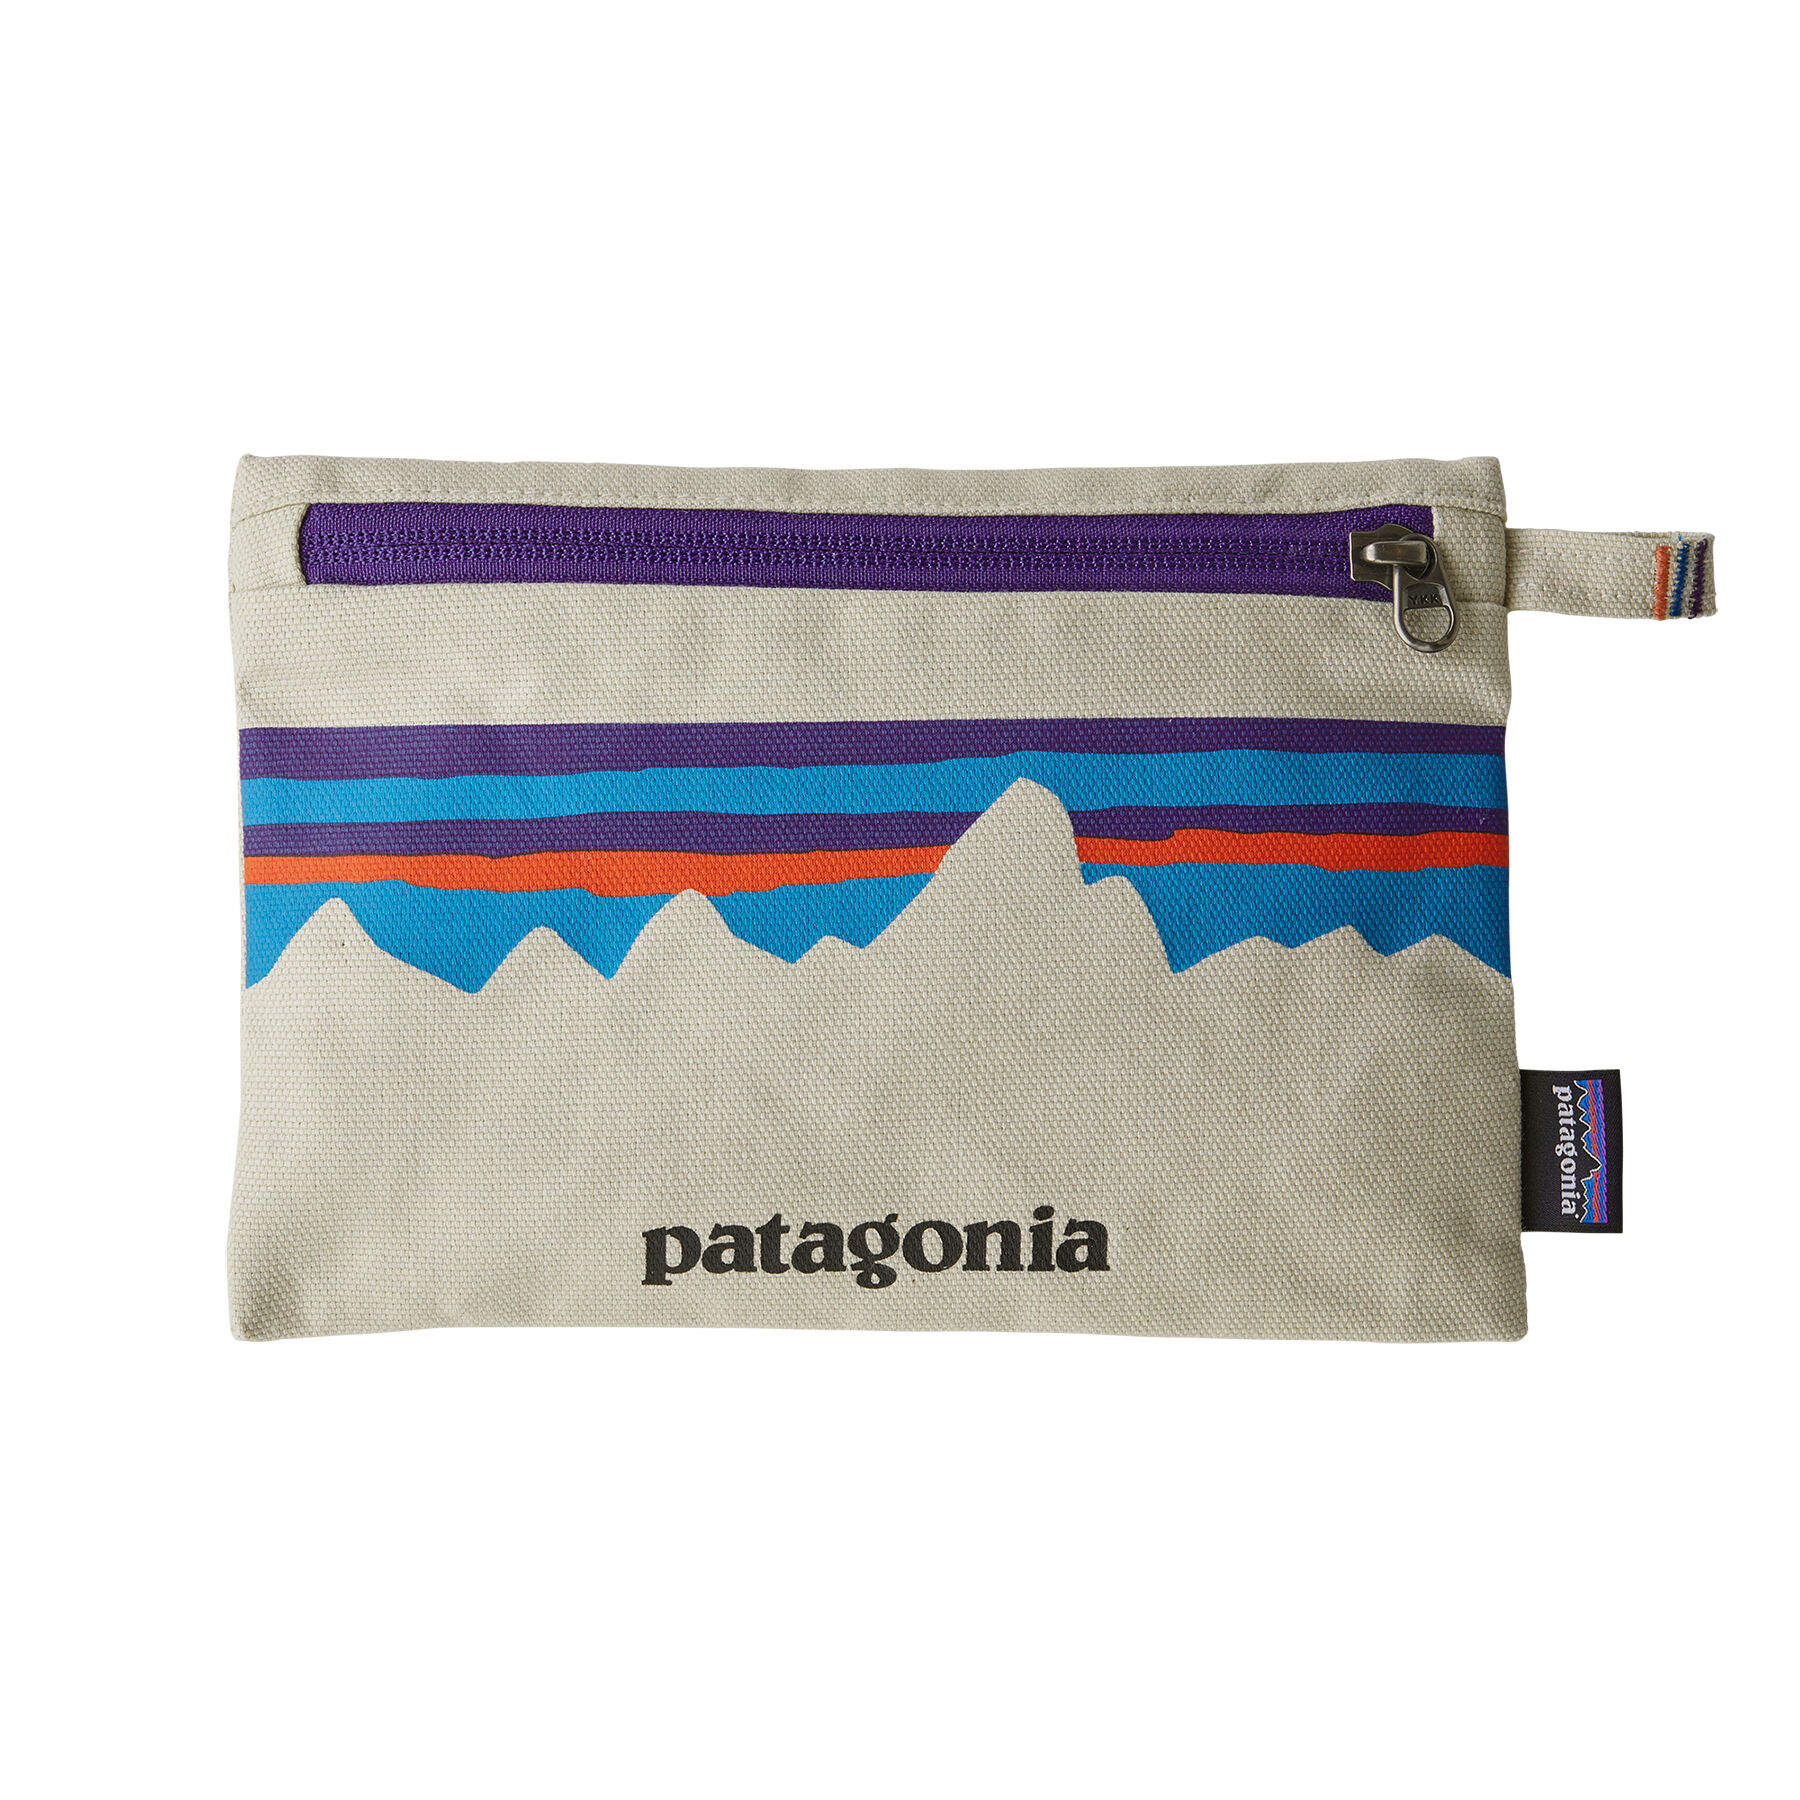 Patagonia Zippered Pouch - Pochette voyage | Hardloop